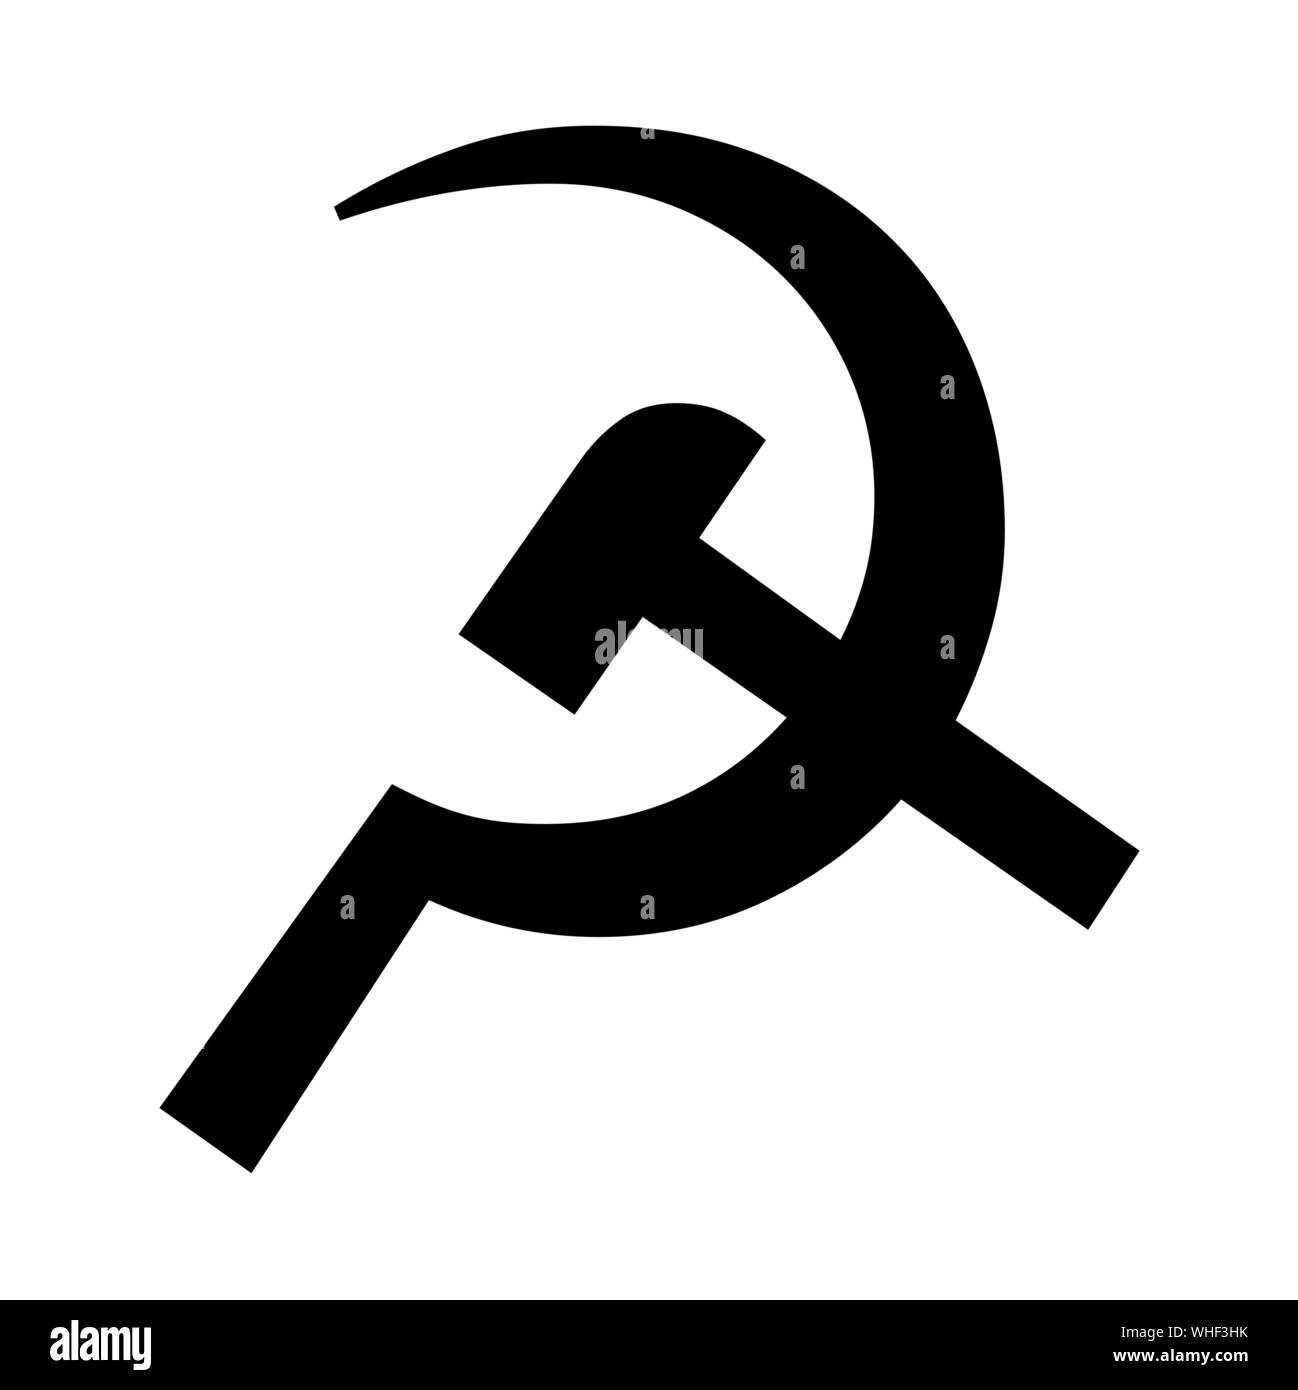 Hammer and Sickle icon Stock Vector